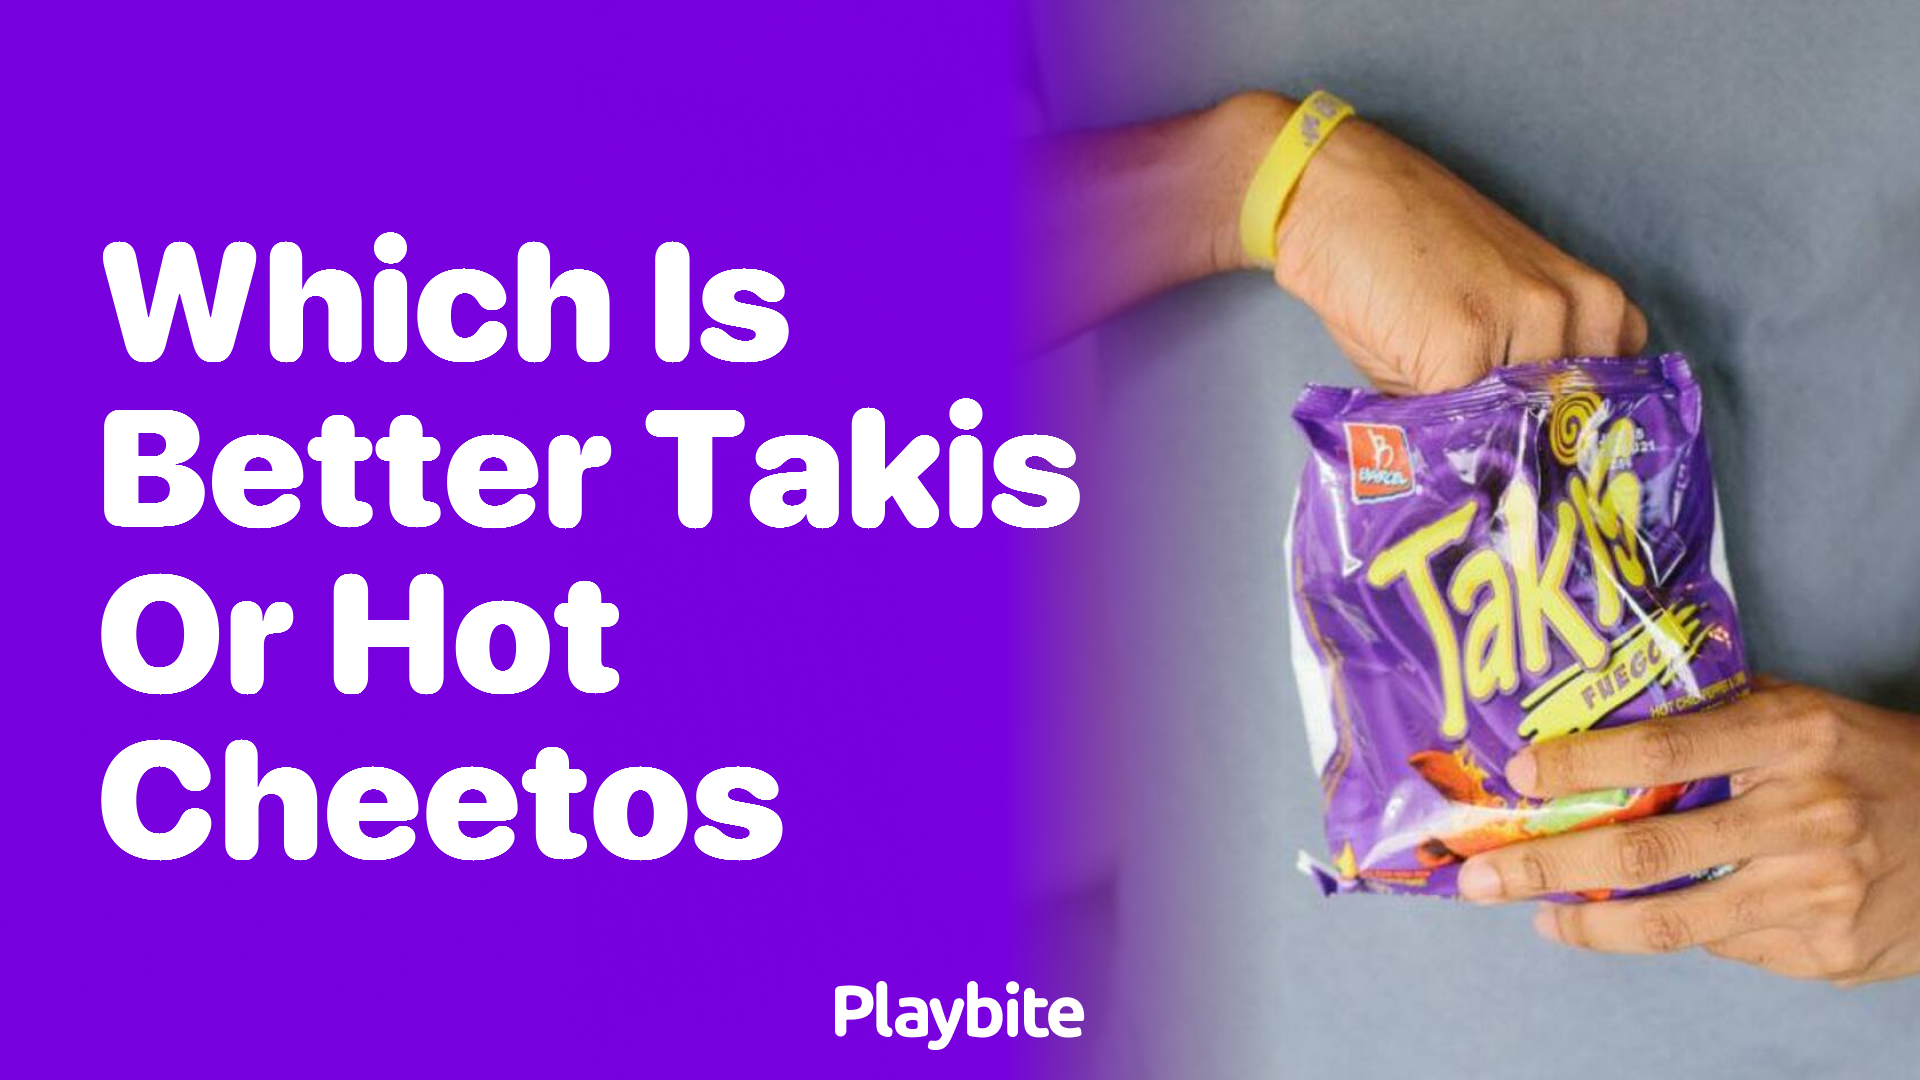 Which is Better: Takis or Hot Cheetos?